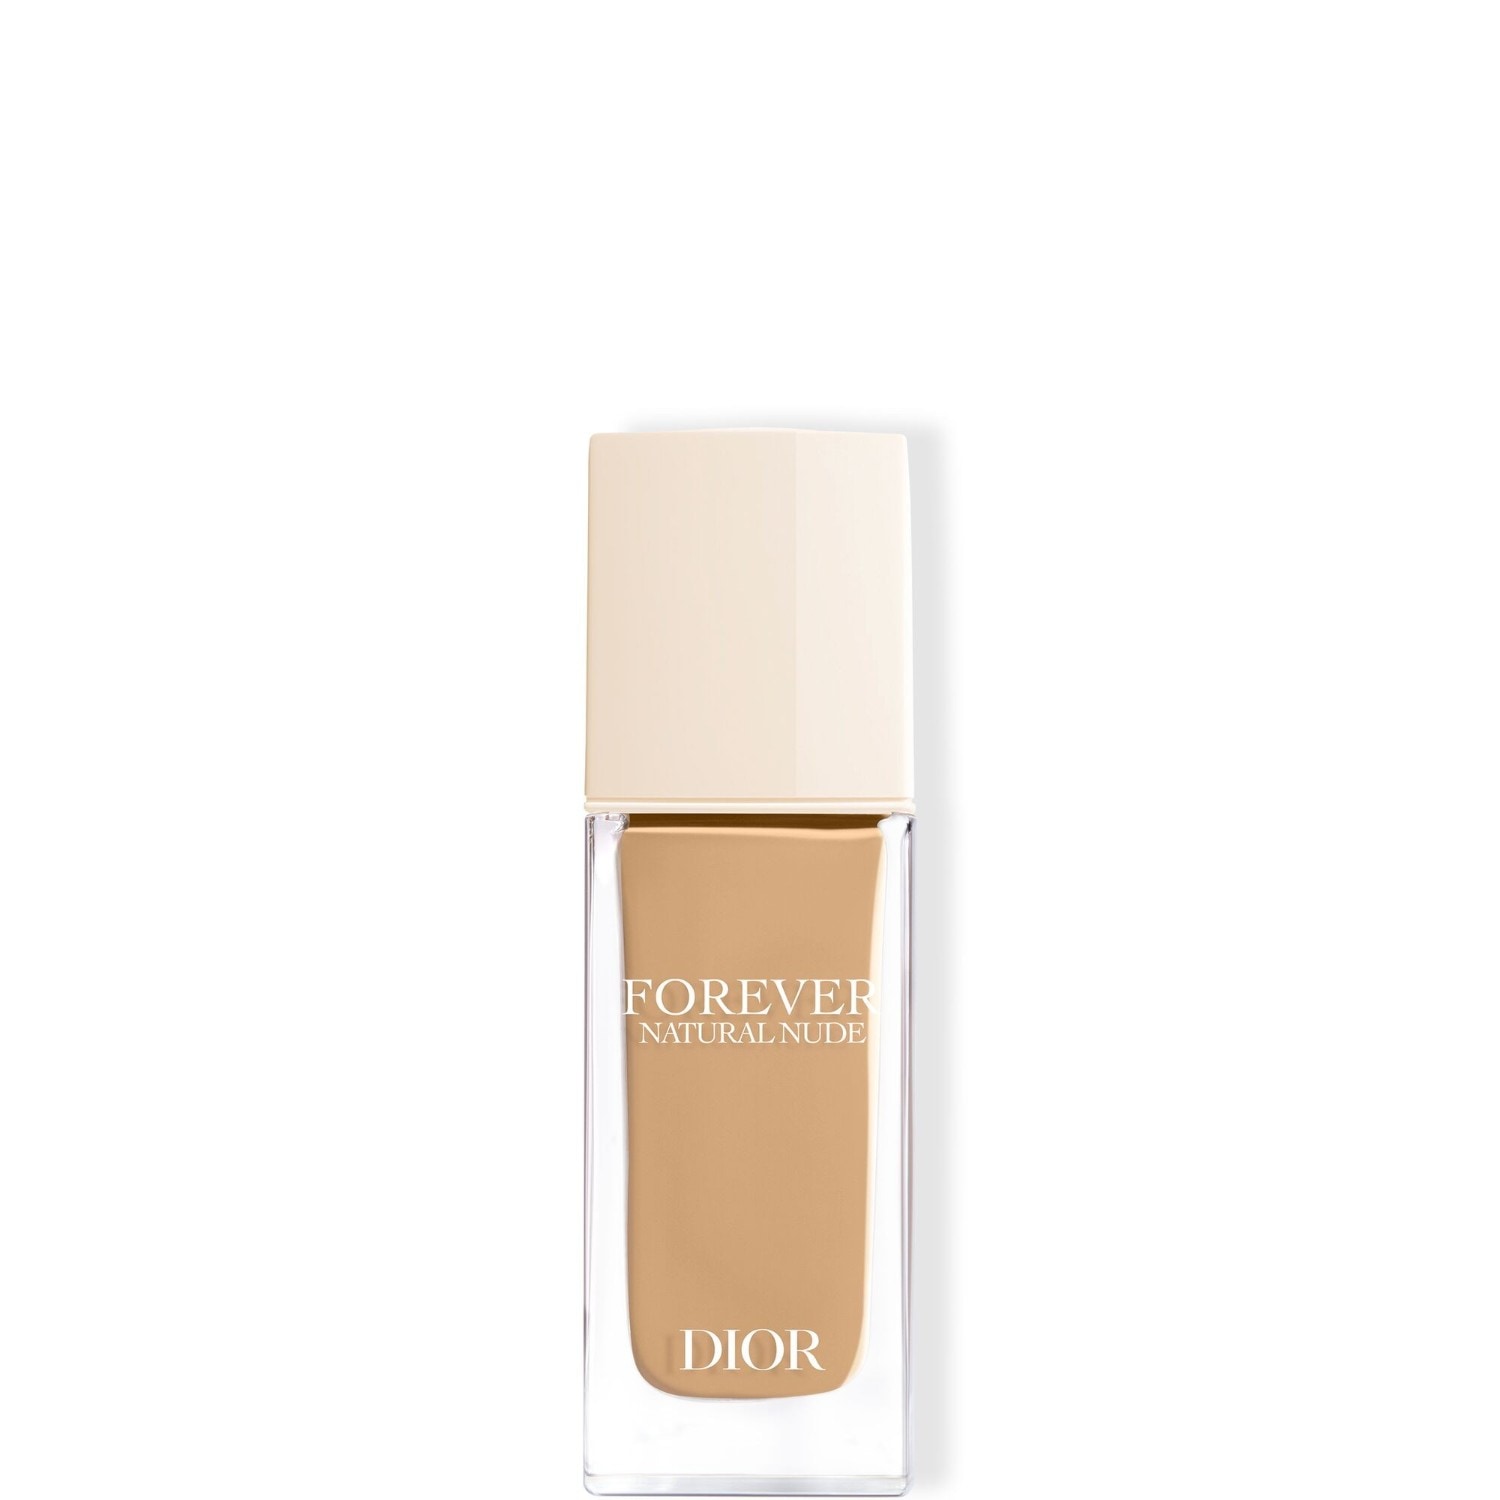 Dior Forever Natural Nude Foundation, Nr. 3WO - Warm Olive